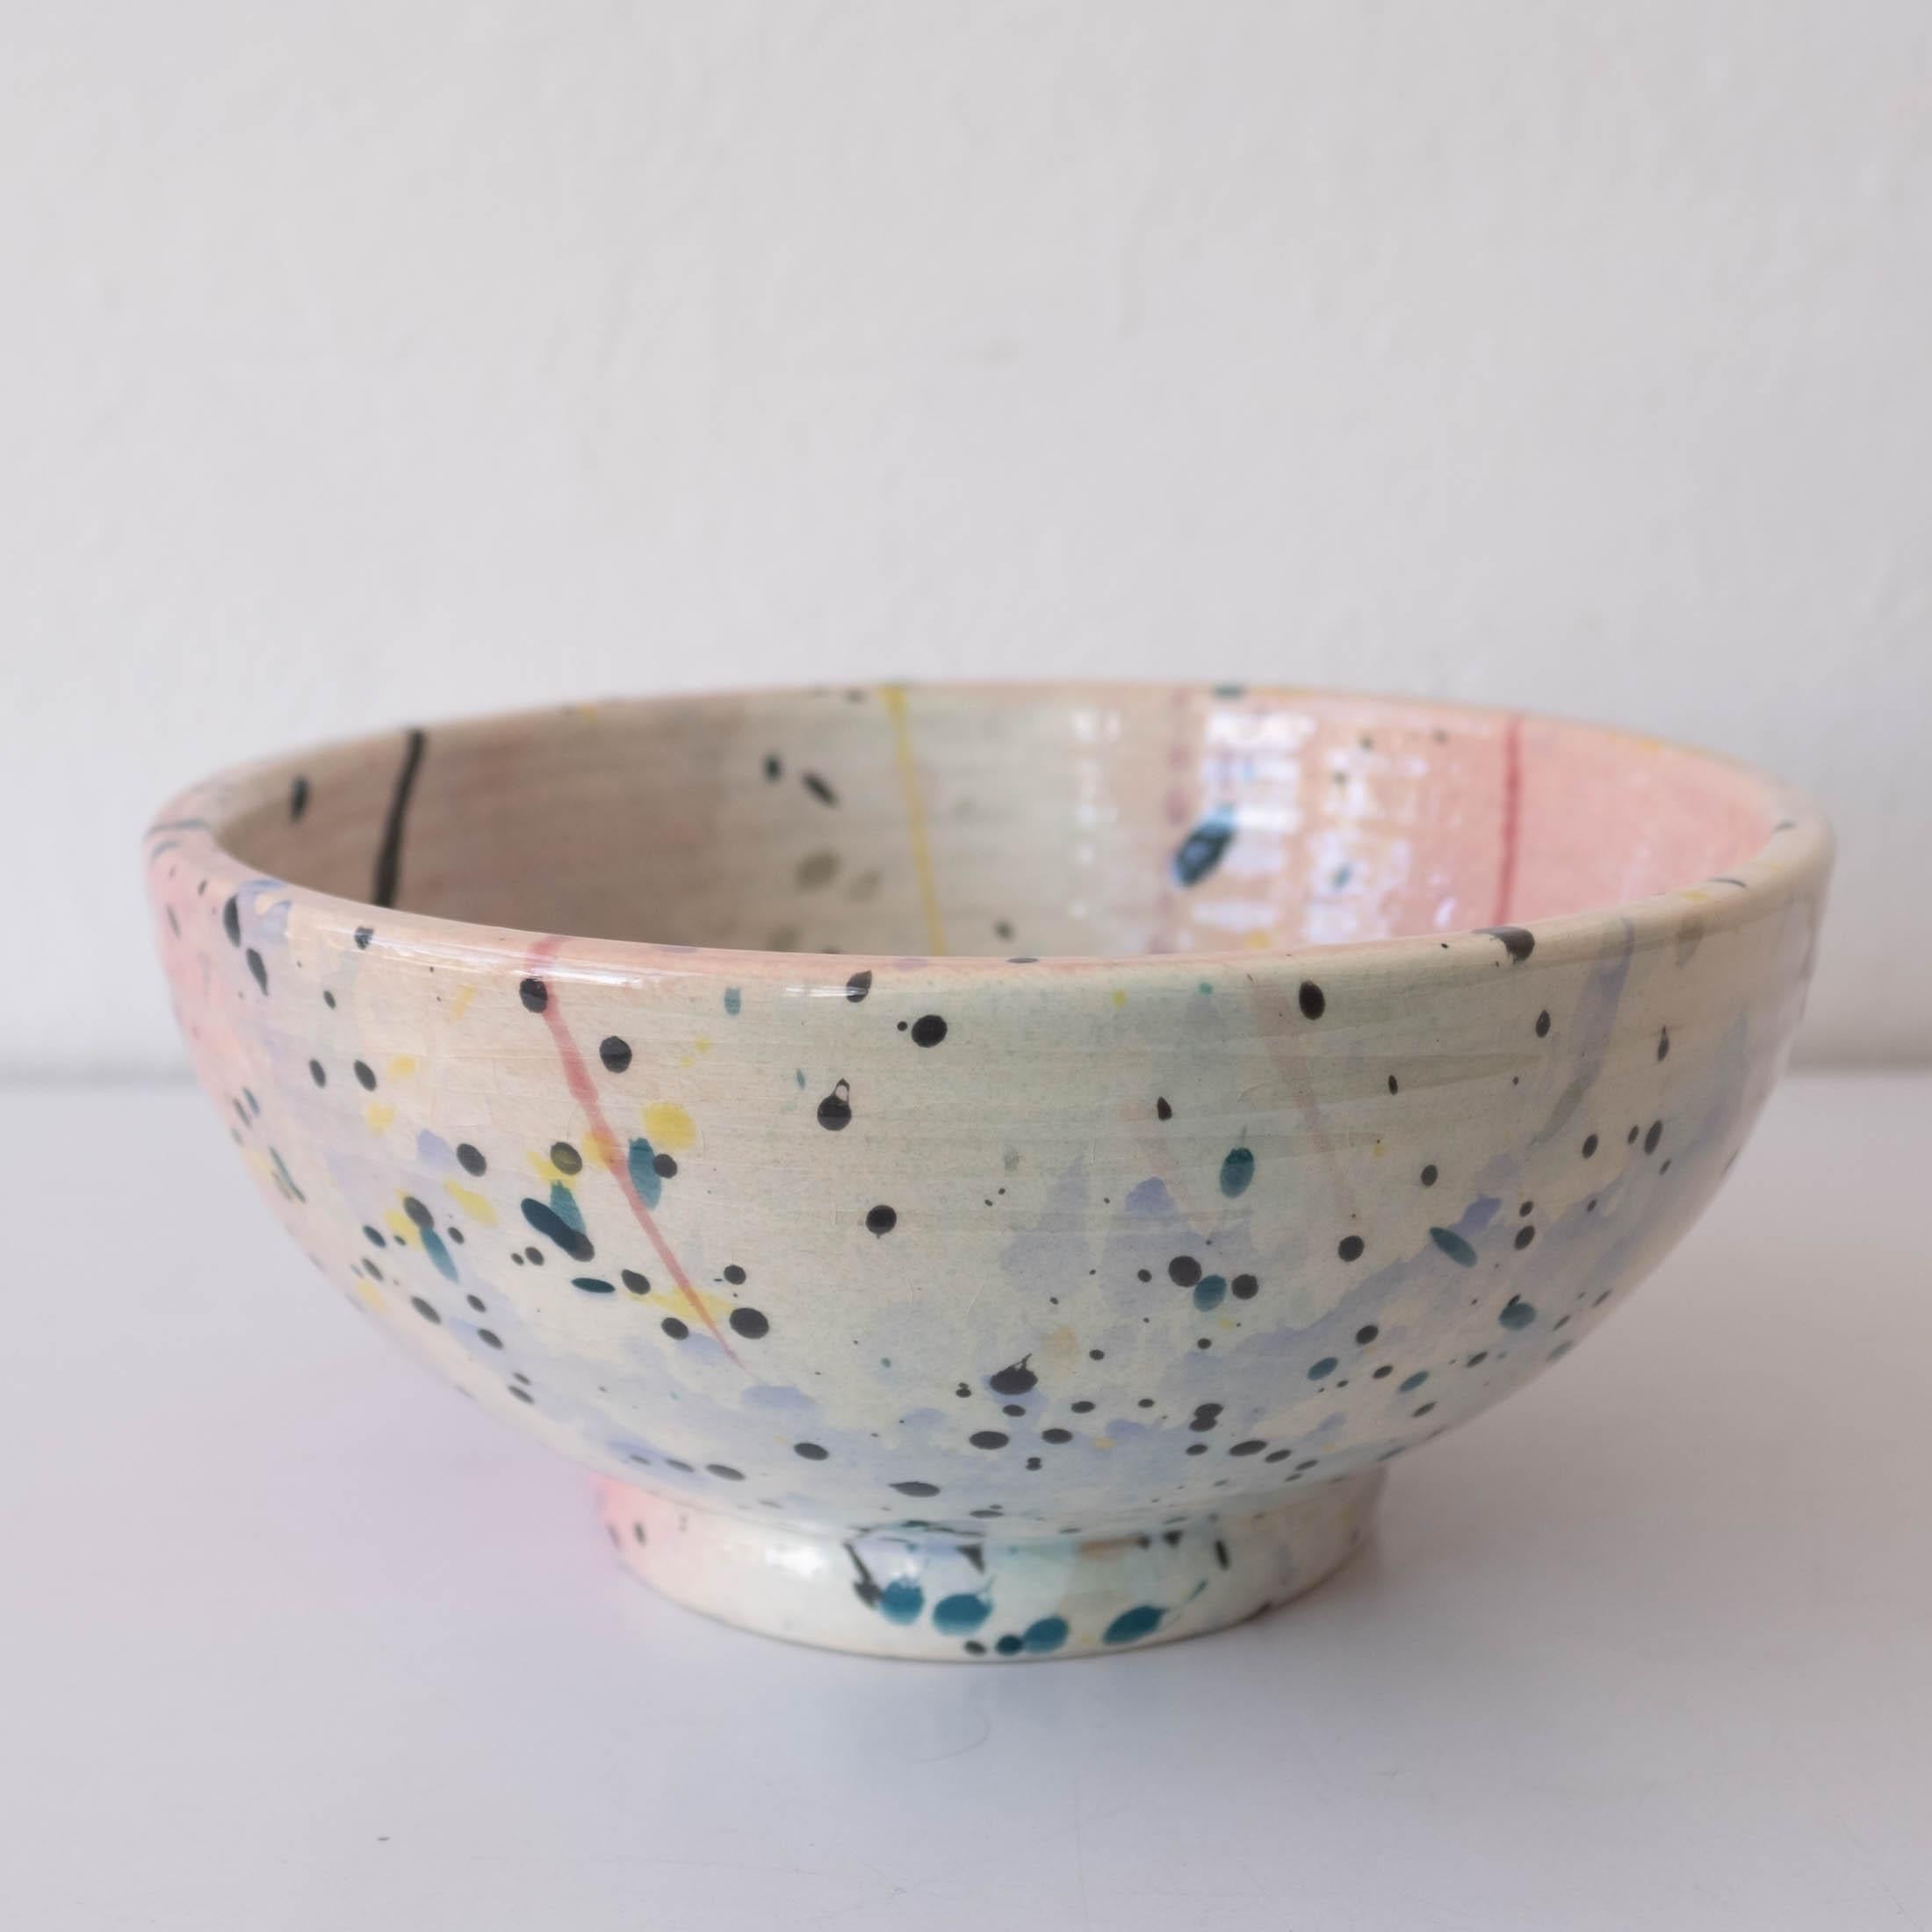 Splatter bowl for the Los Angeles County Museum of Art by Peter Shire, a Los Angeles-based artist and founding member of The Memphis Group. Signed and dated 1984.